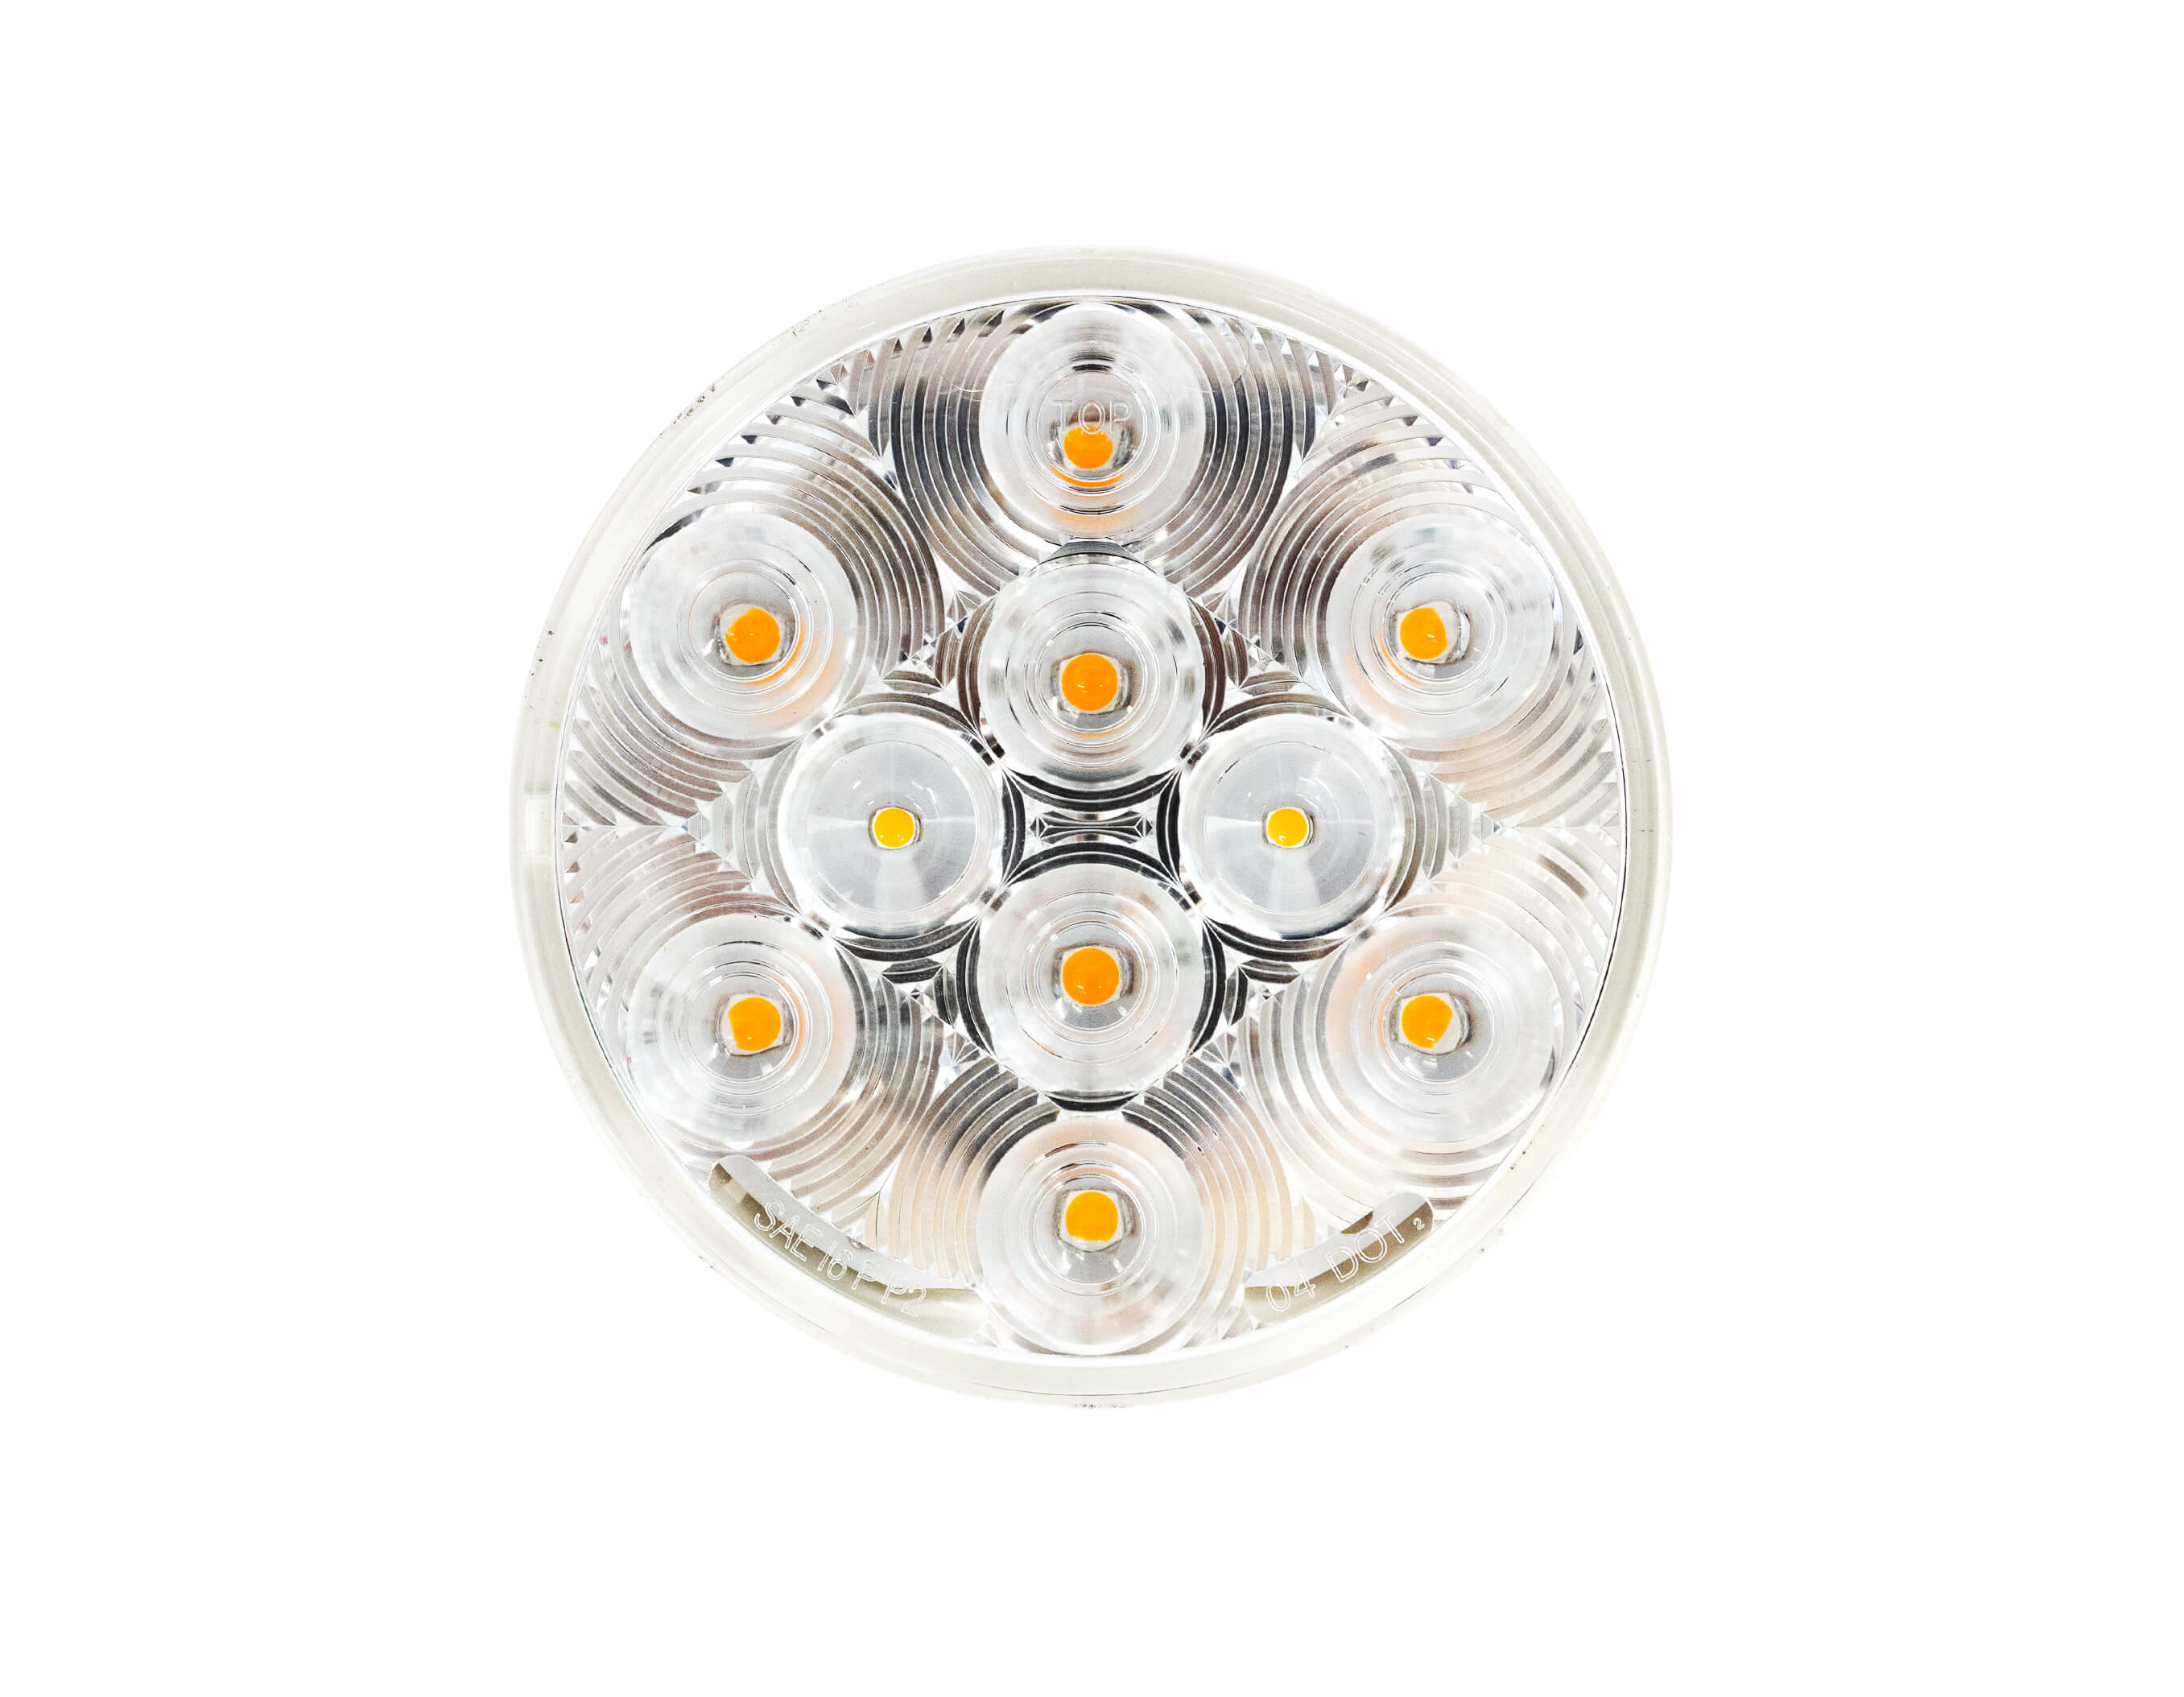 ROUND SIGNAL/PARK TAIL LIGHT 10 DIODE CLEAR AMBER